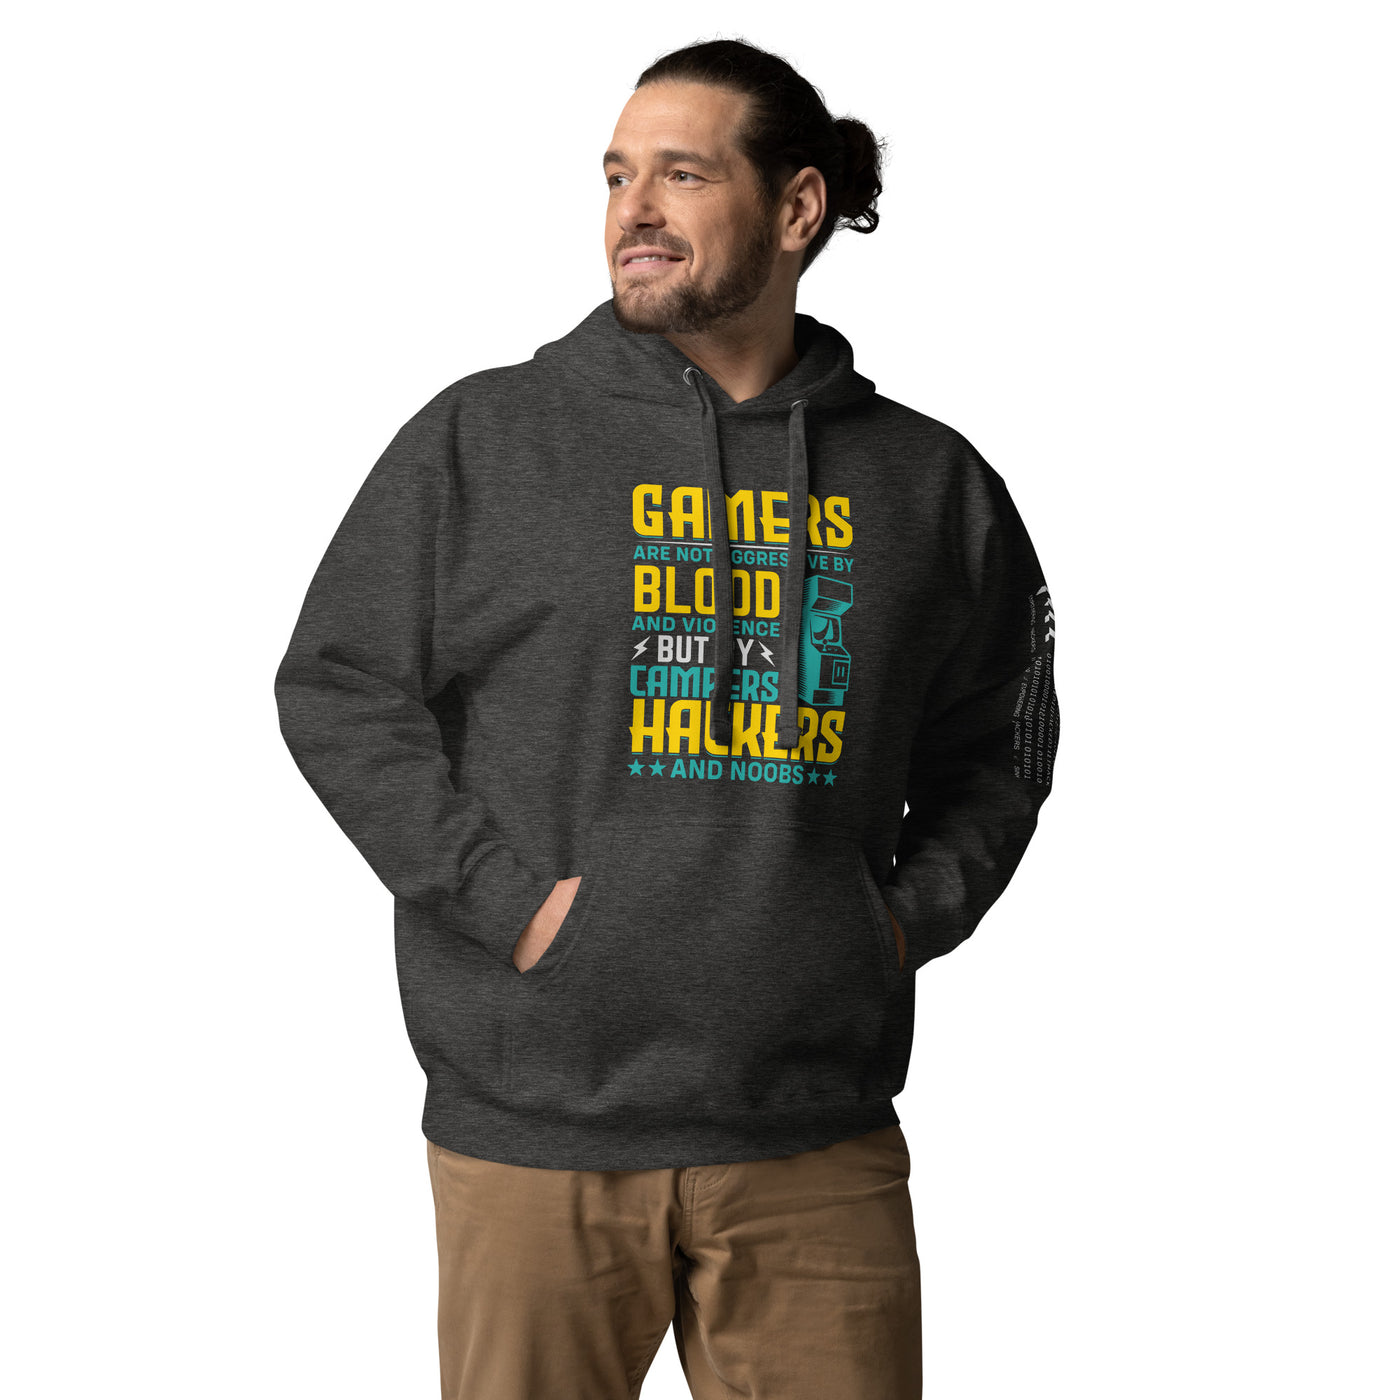 Gamers are not Aggressive by Blood and Violence ( rasel ) - Unisex Hoodie